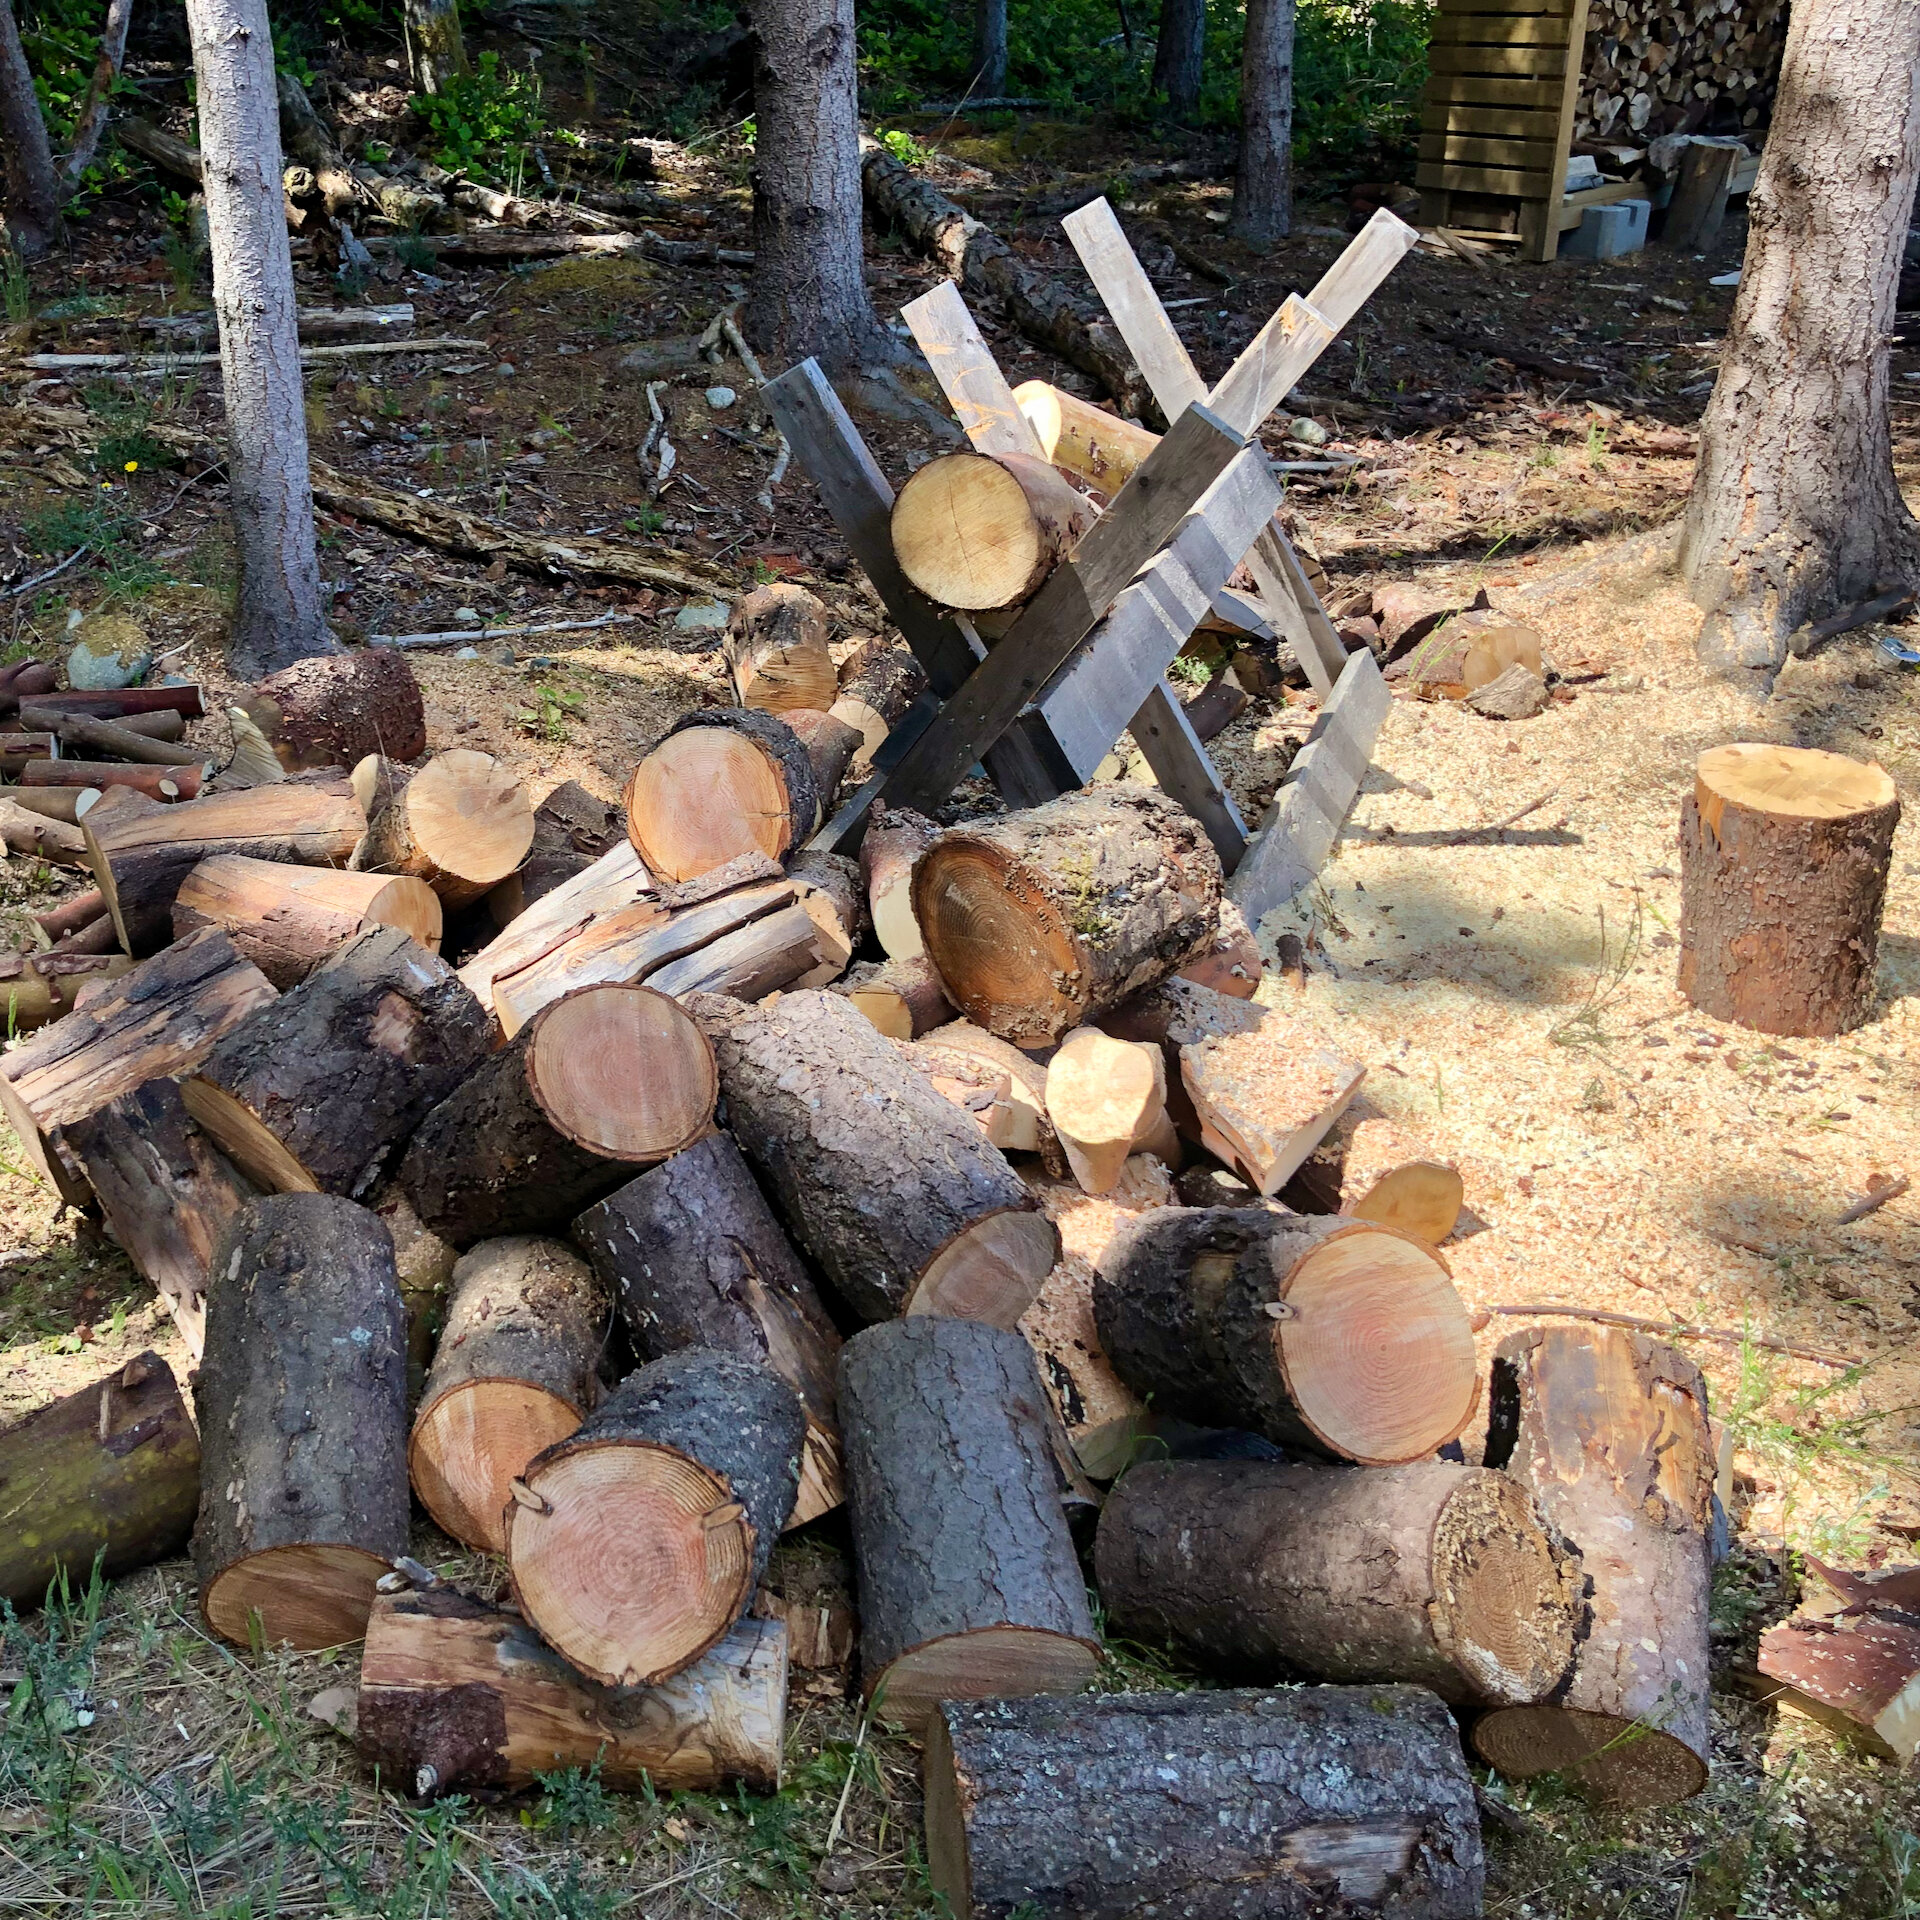  I started with the pile of logs that had been sitting there. It was mostly arbutus and a bit of fir that had come down over the winter. 